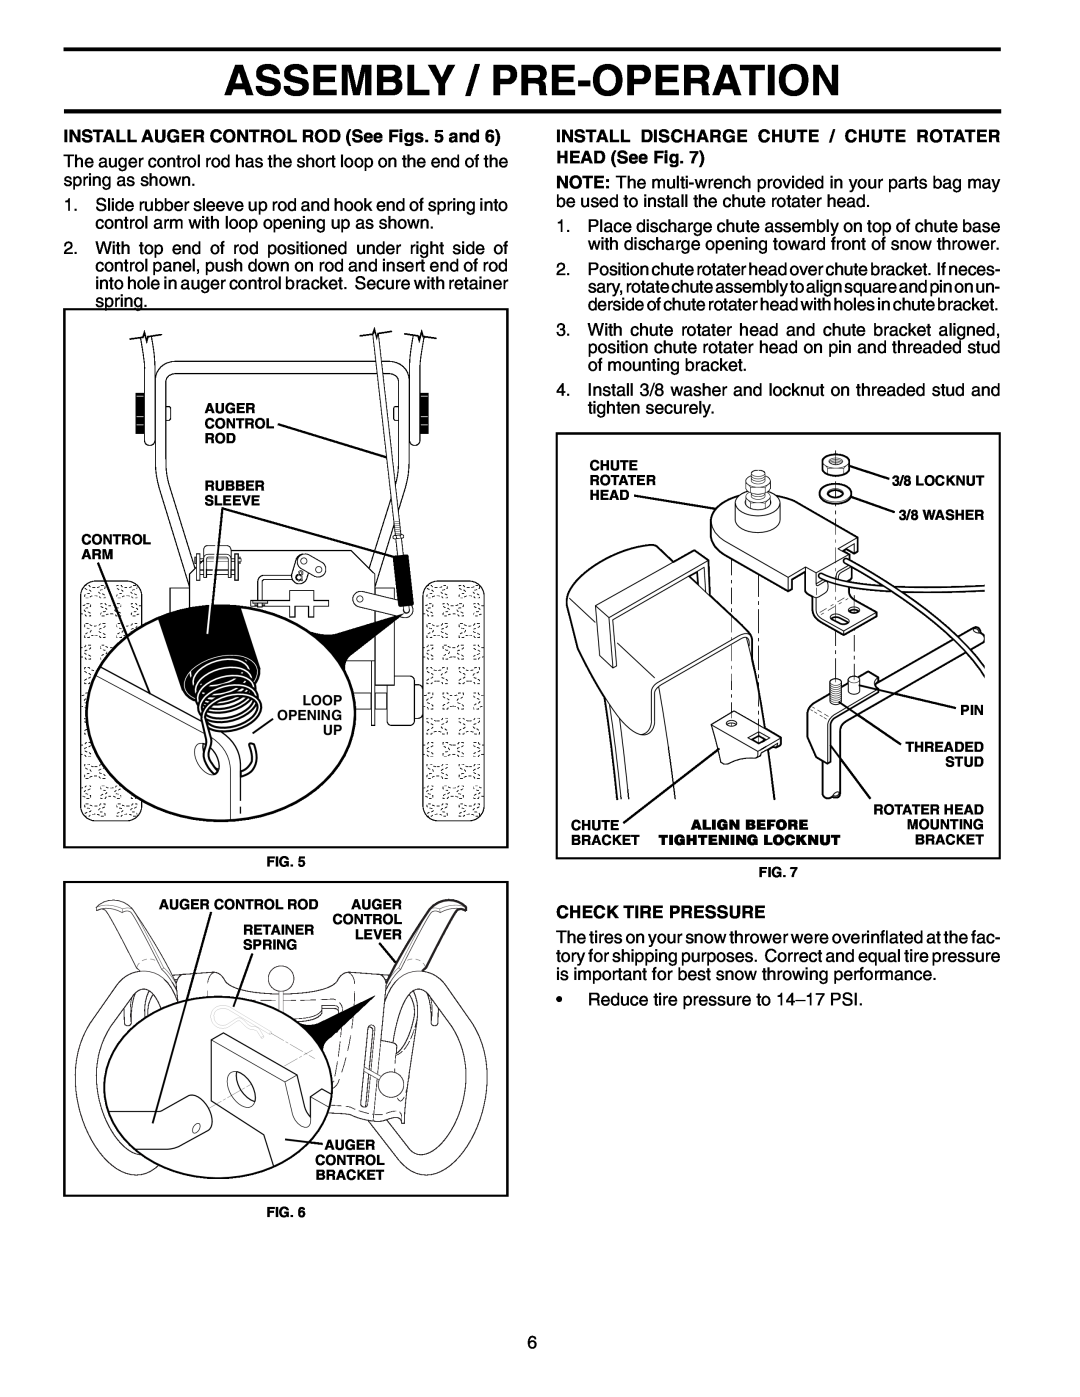 Poulan 199350 owner manual Assembly / Pre-Operation, INSTALL AUGER CONTROL ROD See Figs. 5 and, Check Tire Pressure 